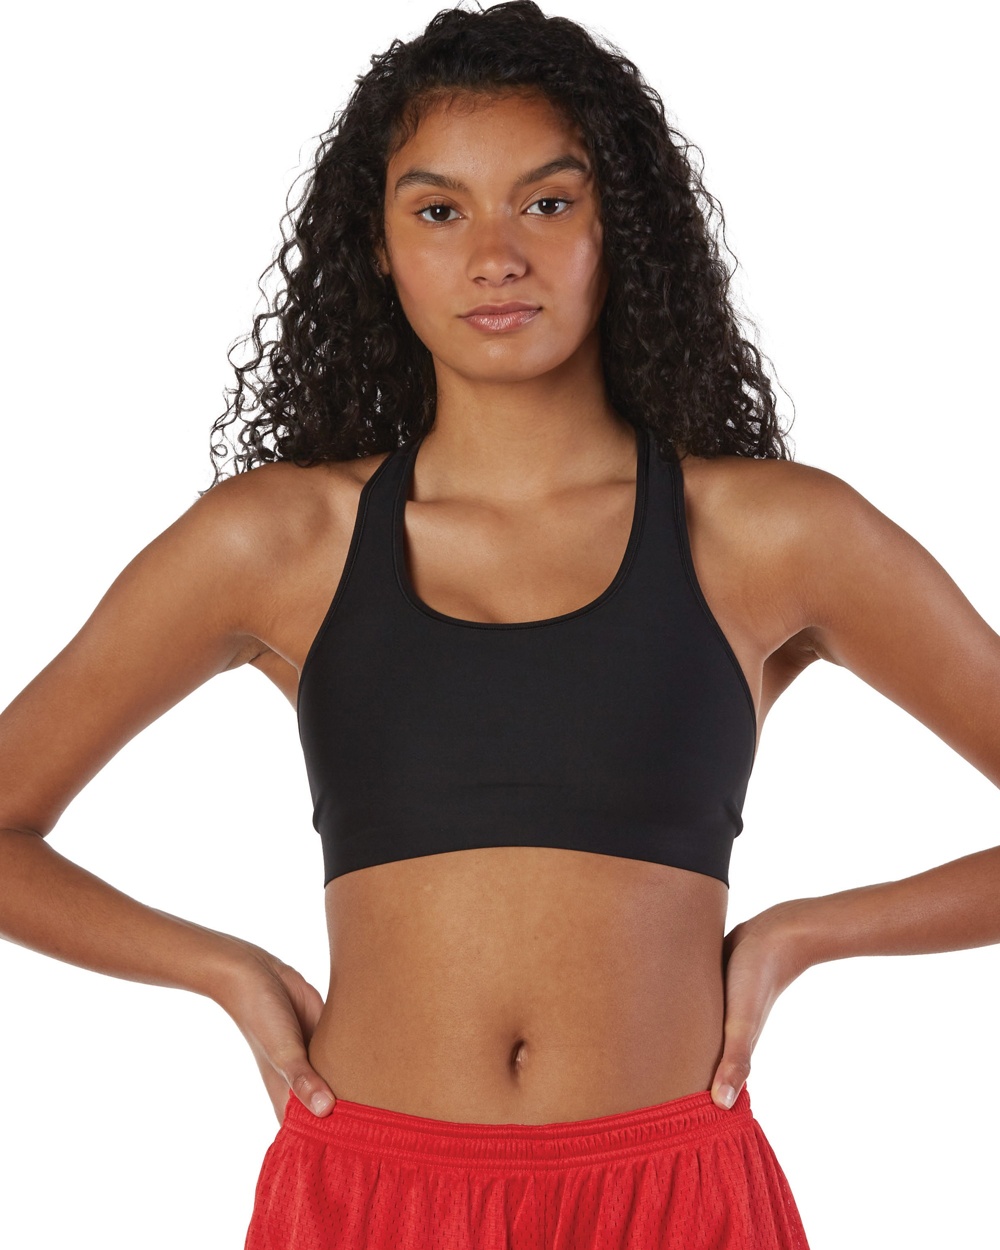 Champion Women's Absolute Sports Bra with SmoothTec Band